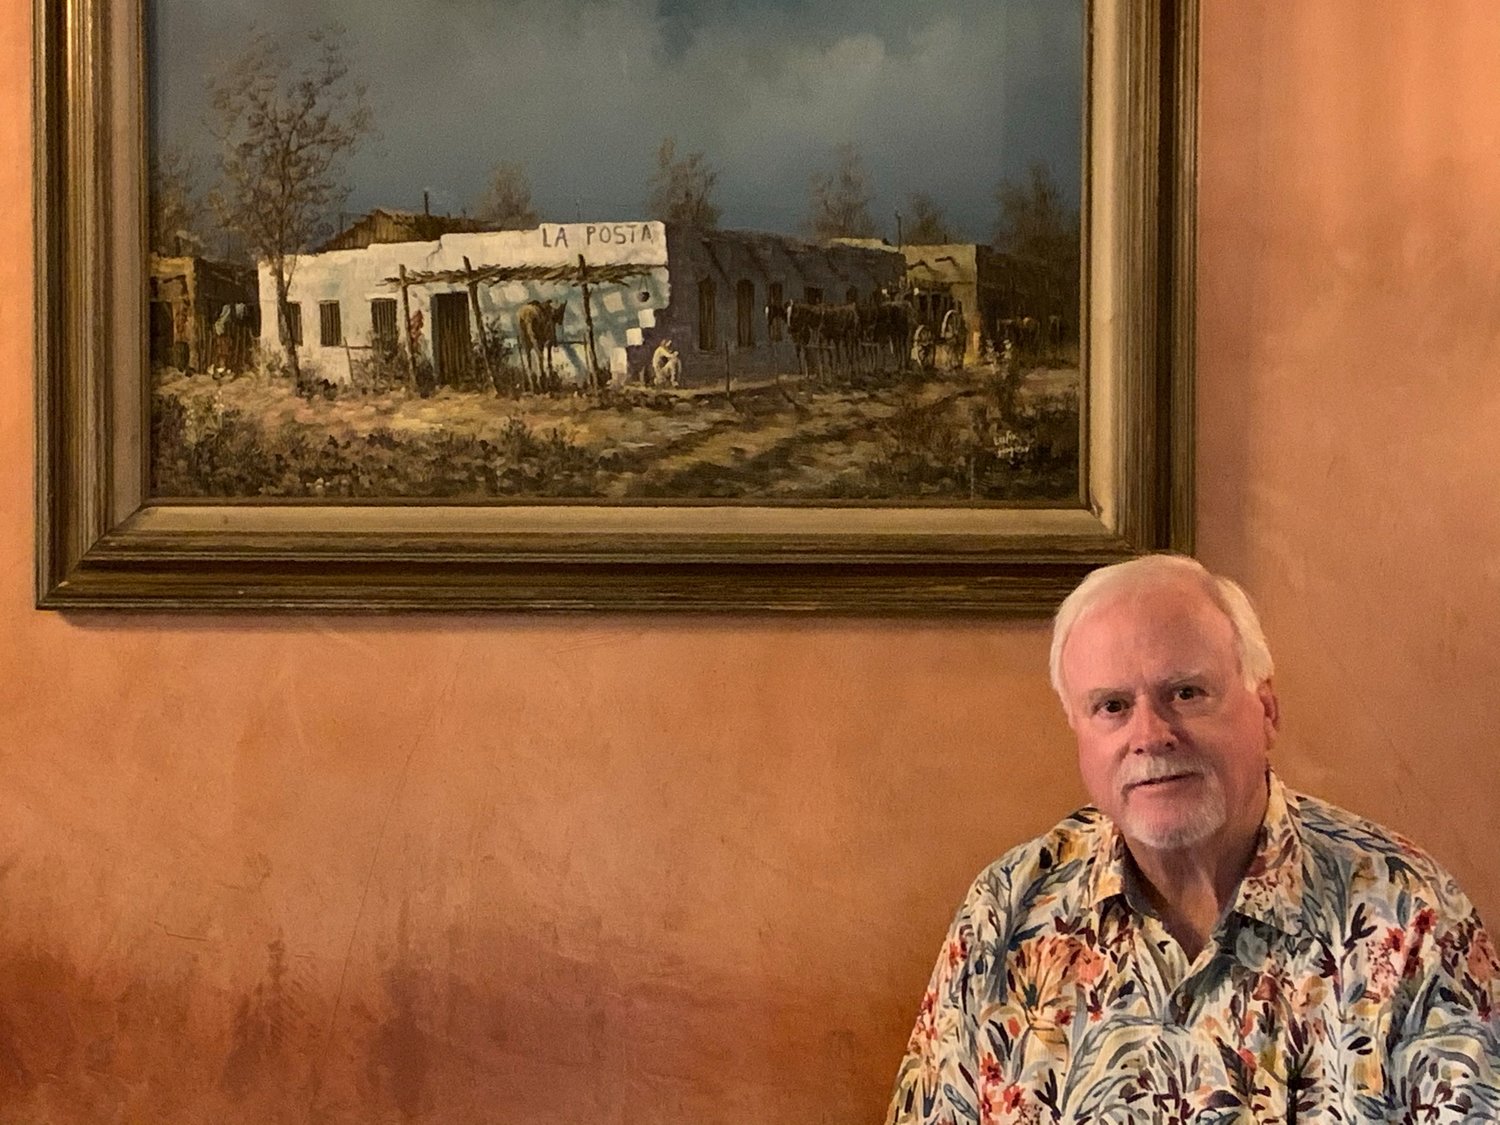 La Posta de Mesilla co-owner Tom Hutchinson talks about the heritage of the restaurant which has received a Backing Historic Small Restaurants grant.